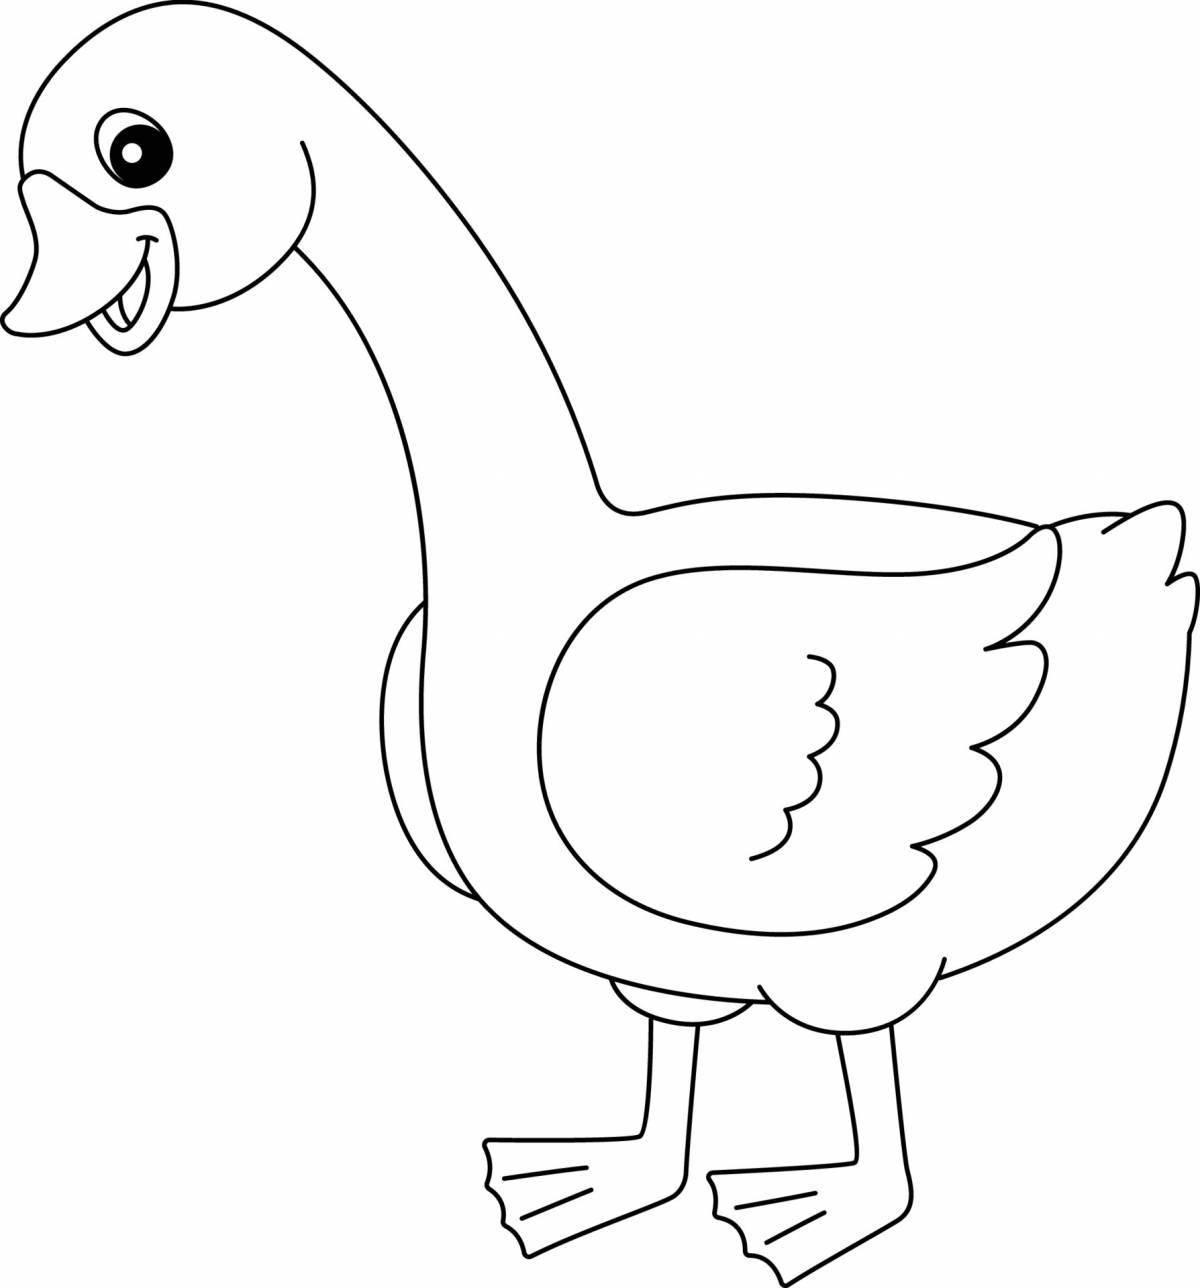 Coloring book joyful goose for children 3-4 years old